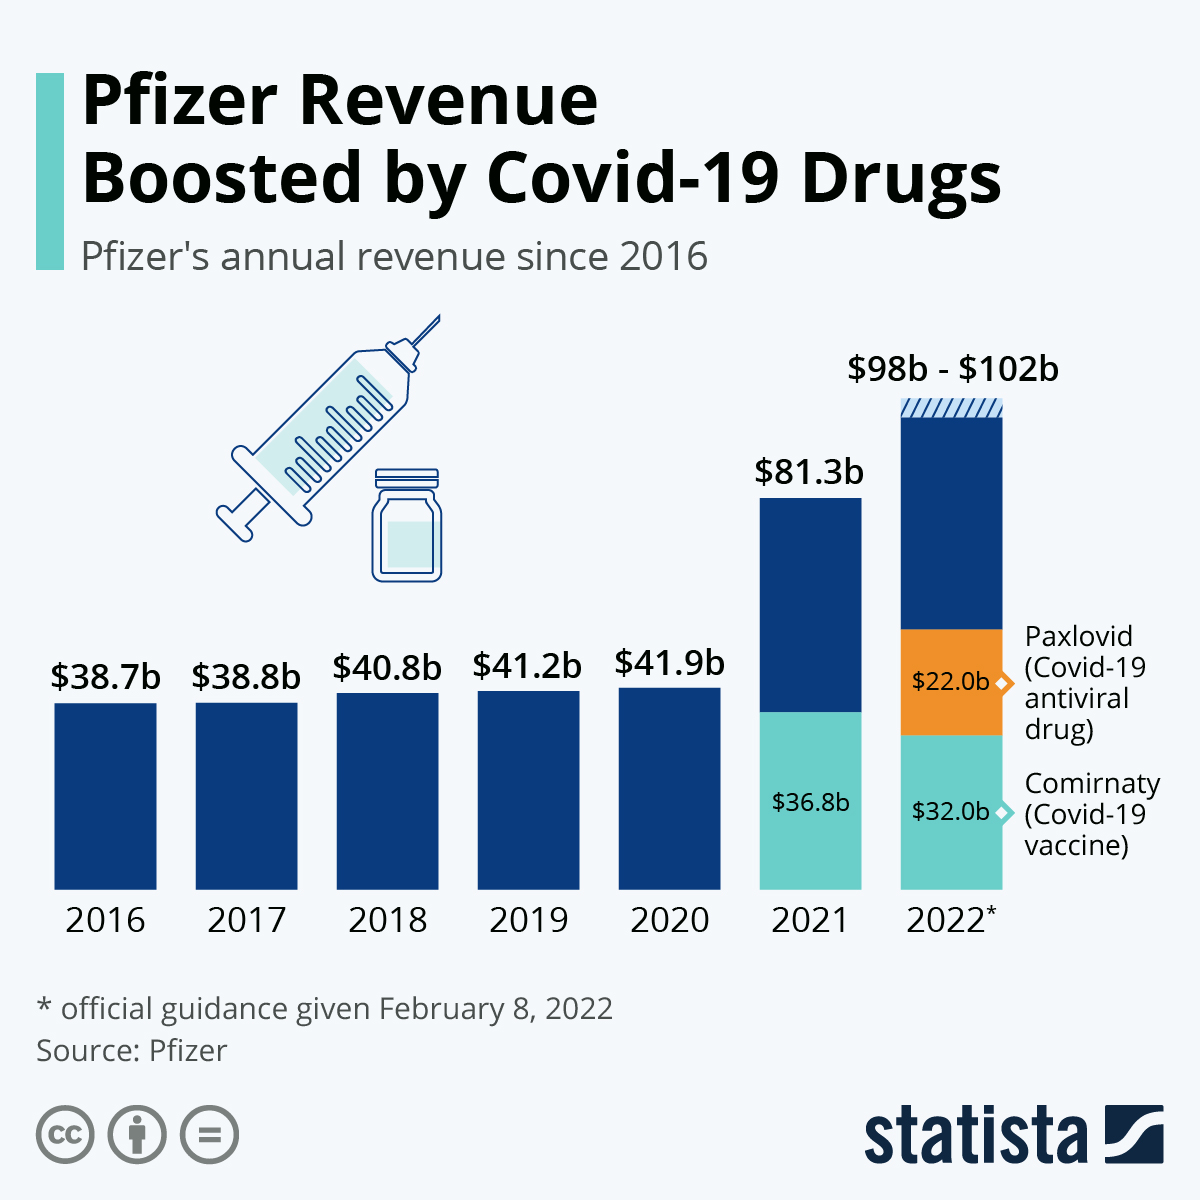 Pfizer Revenue Boosted by Covid-19 Drugs
